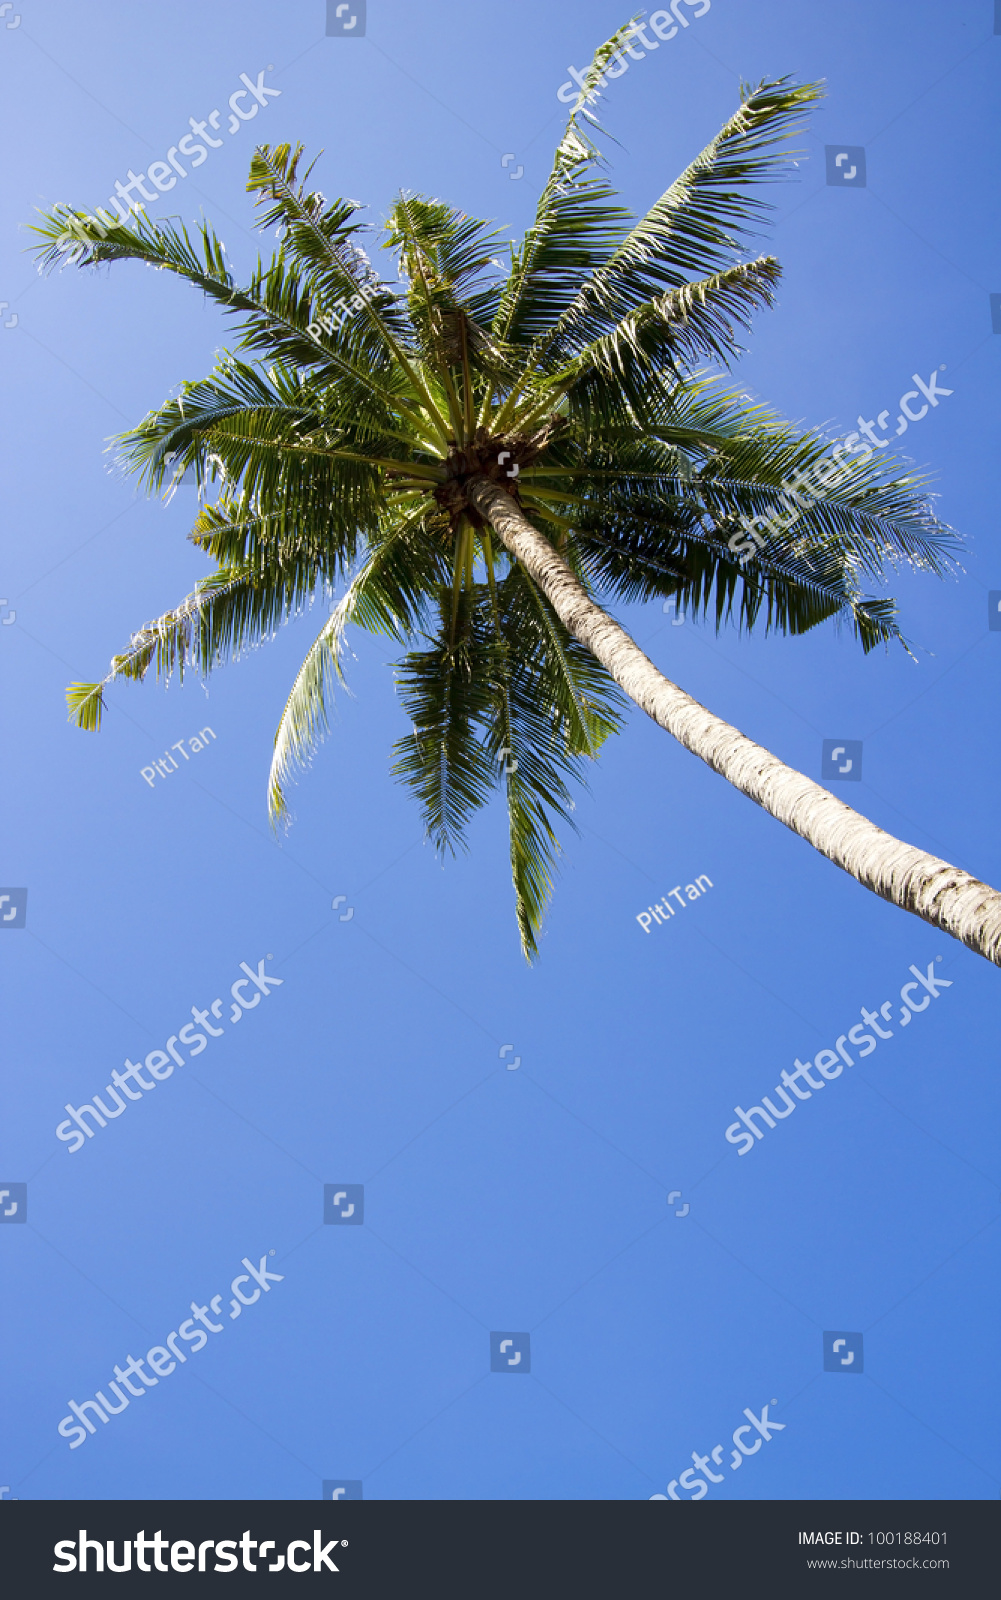 Coconut One Coconut Palm Tree Lean Photo Now) 100188401